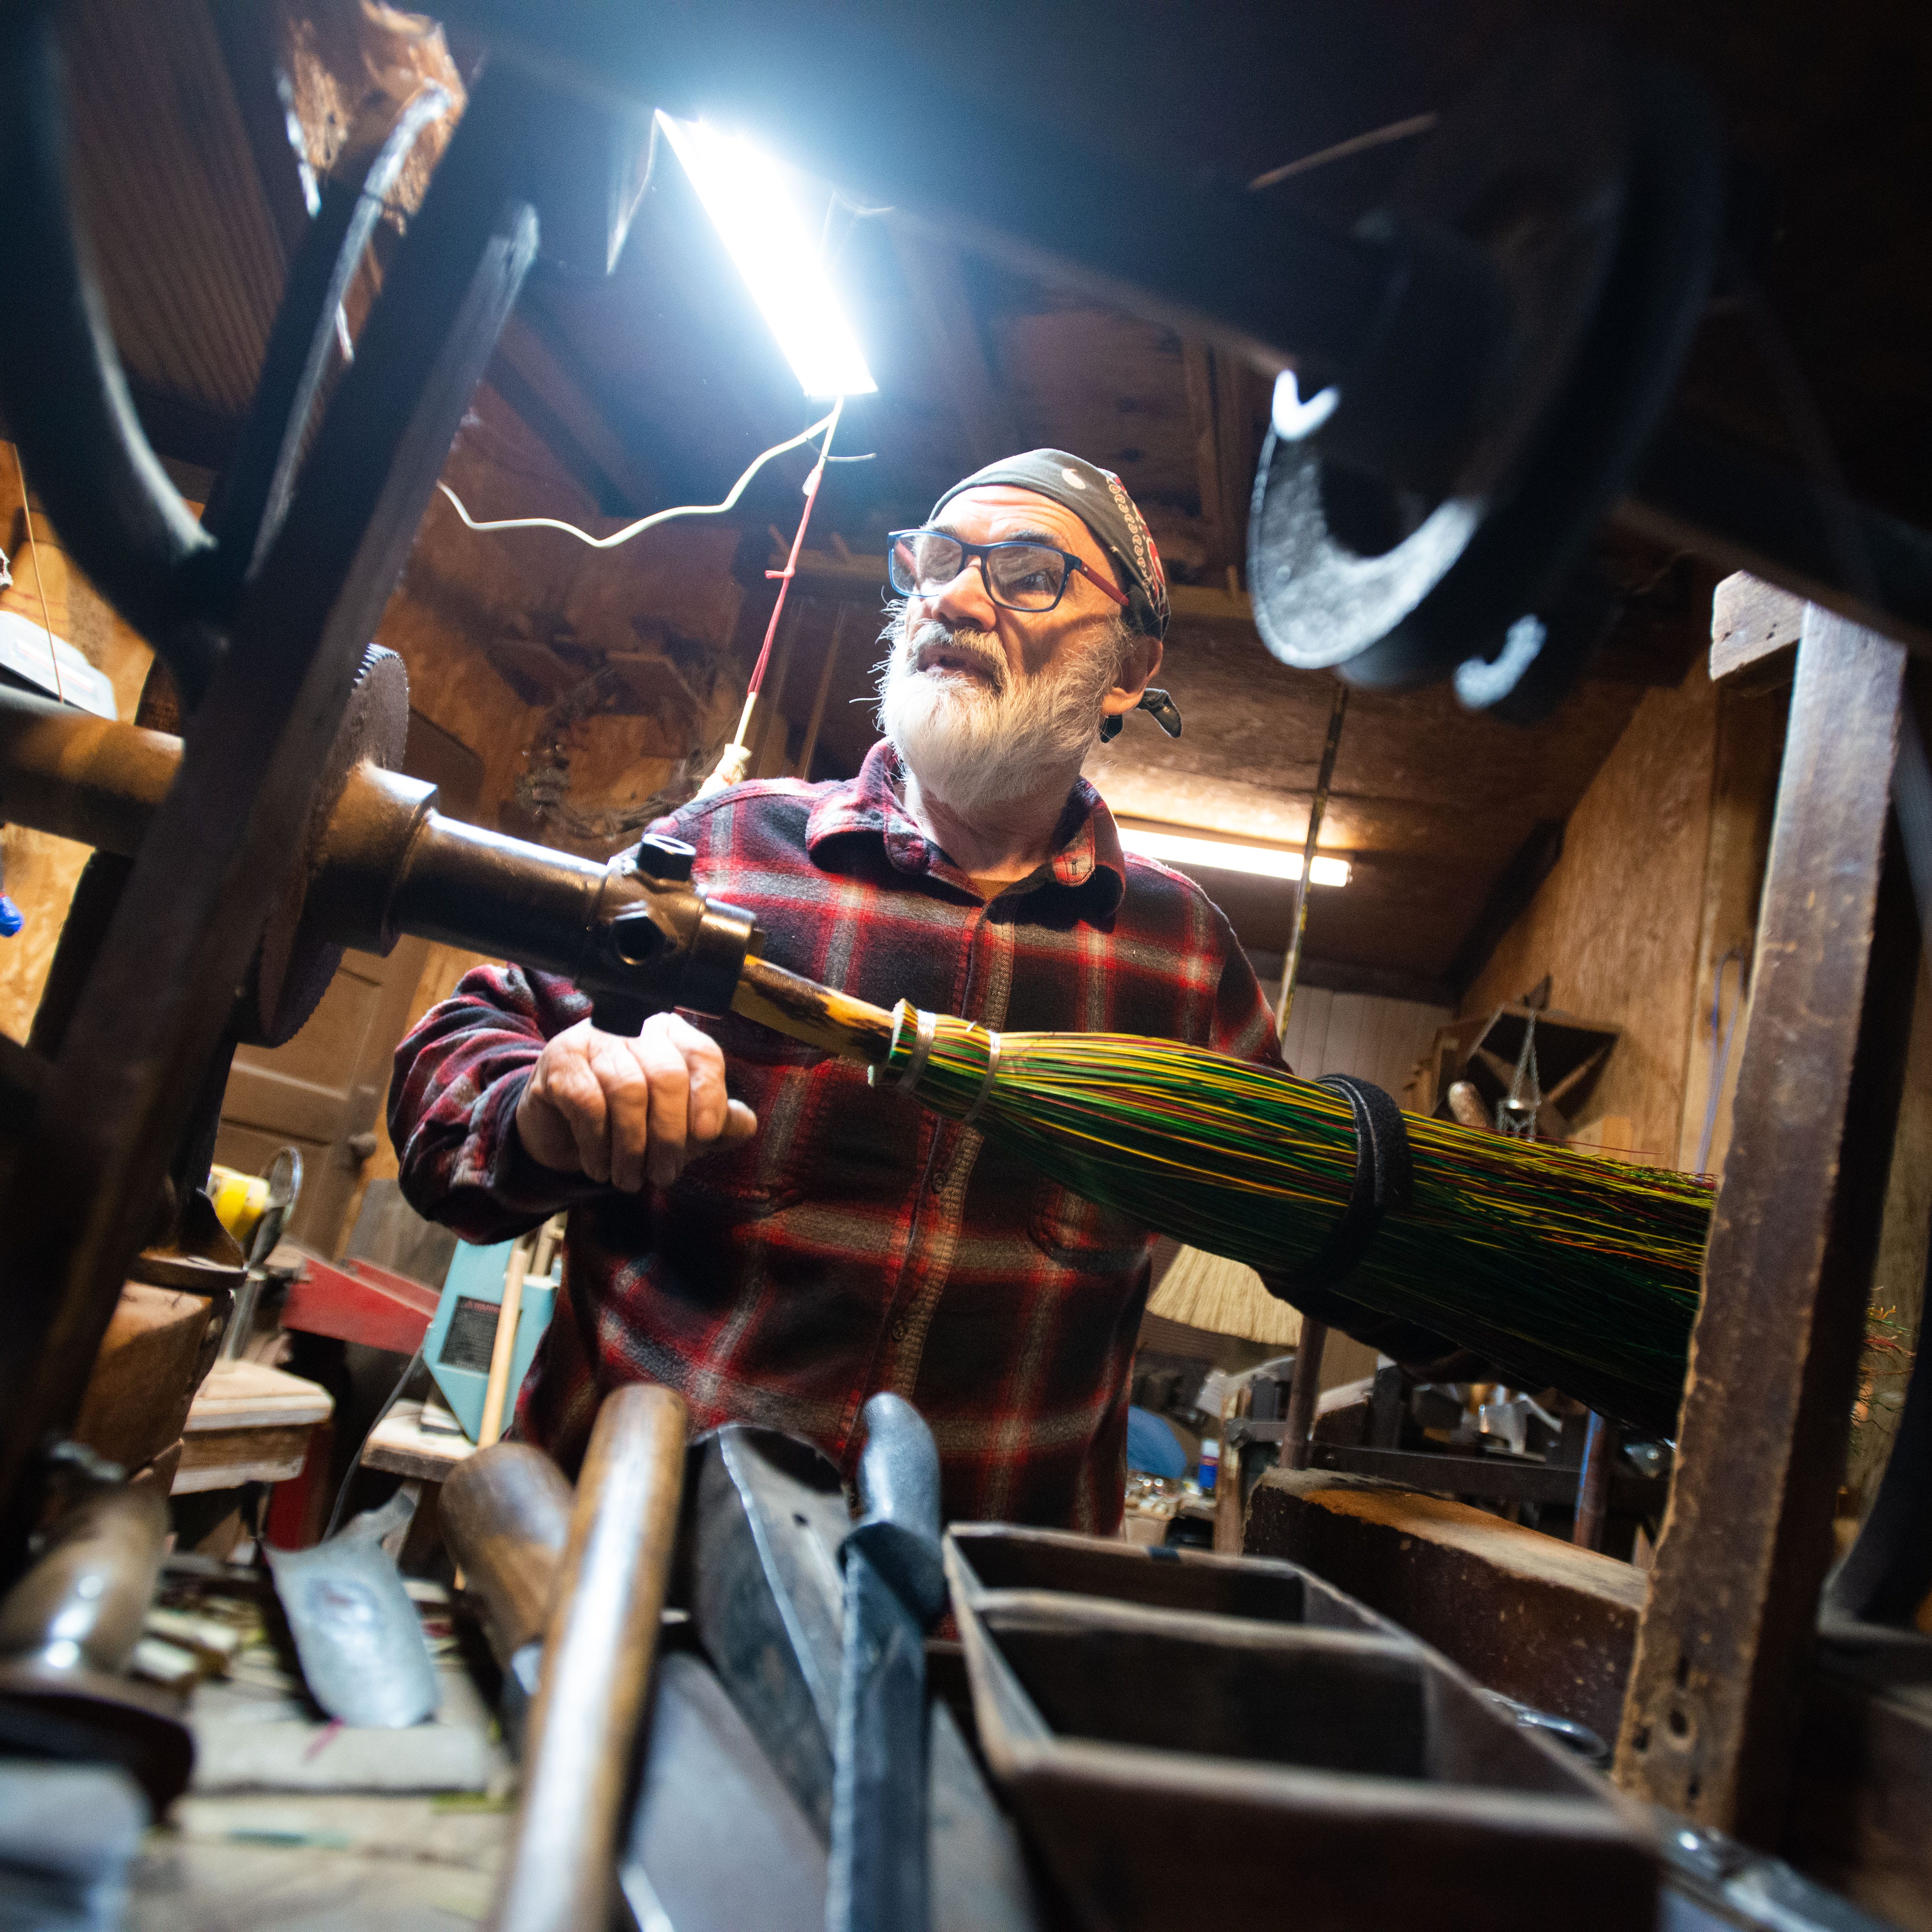 Broom-maker Jack Martin looks for a special tool to finish off the broomcorn inside Hockaday Brooms in Selmer, Tenn. on Wednesday, Mar. 8, 2023.